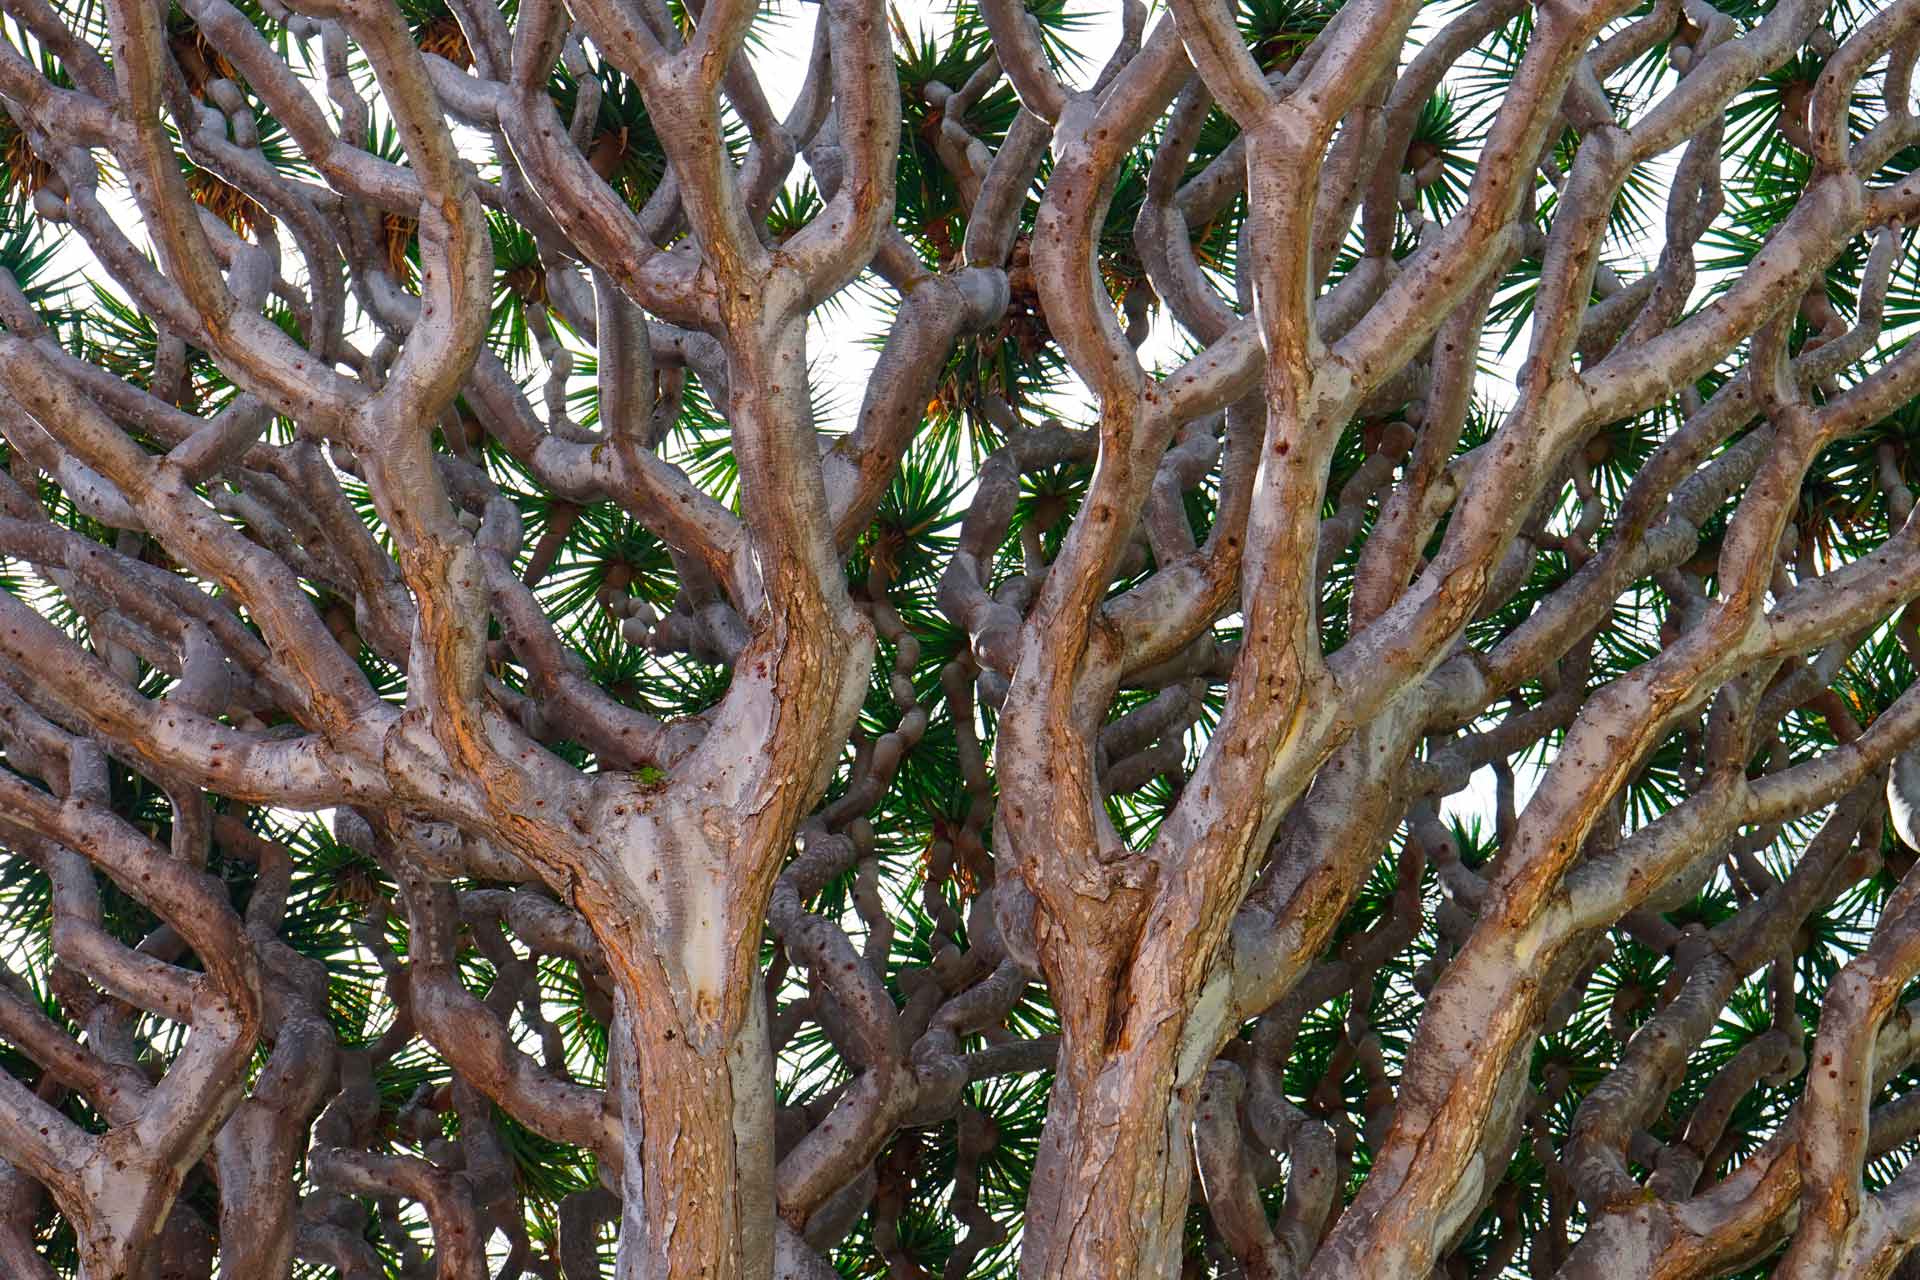 Detail of the branches of the Millennial Dragon Tree